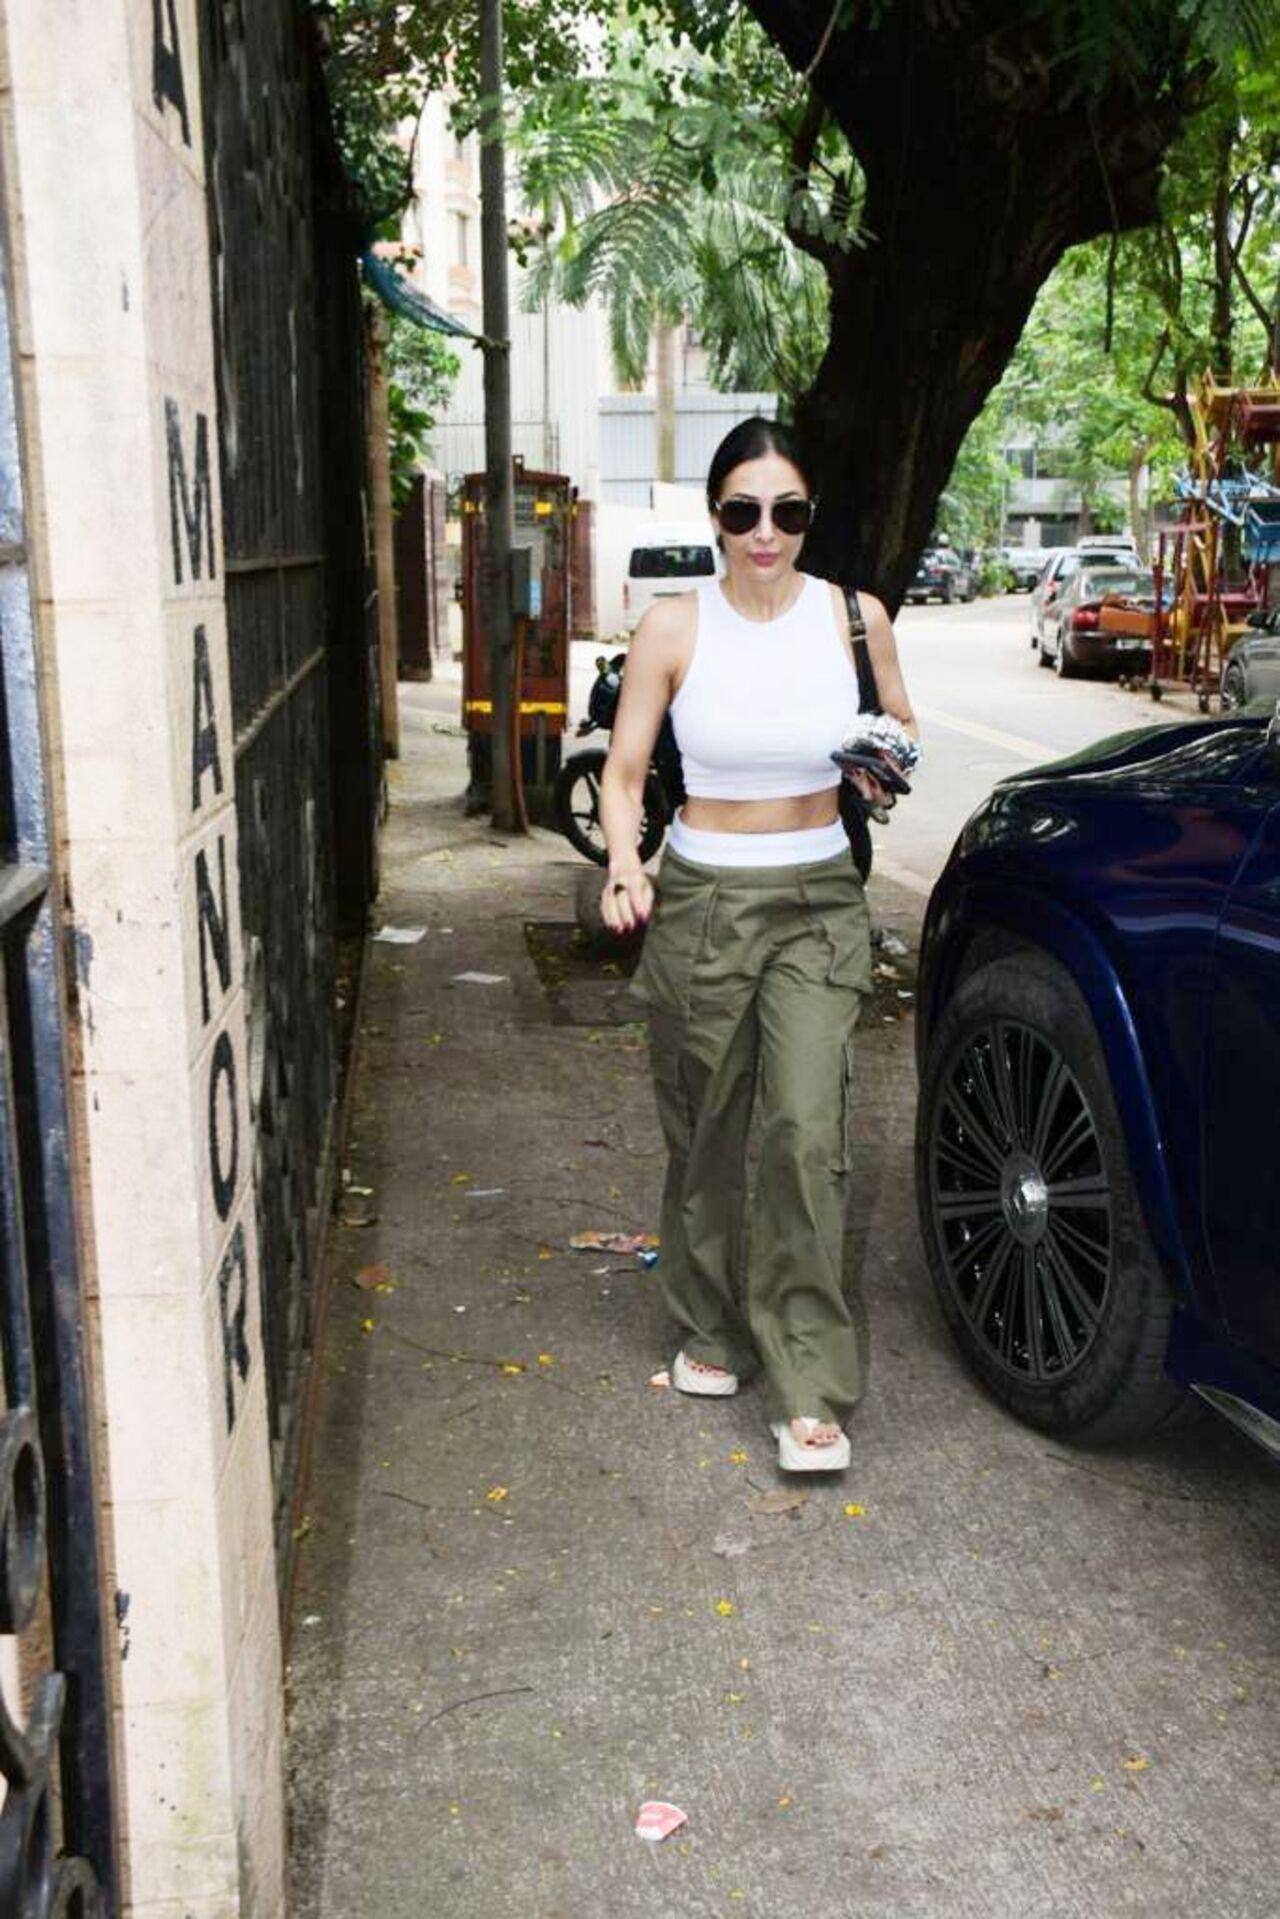 Malaika Arora looked fashionable as she was spotted at her parents' house in Bandra